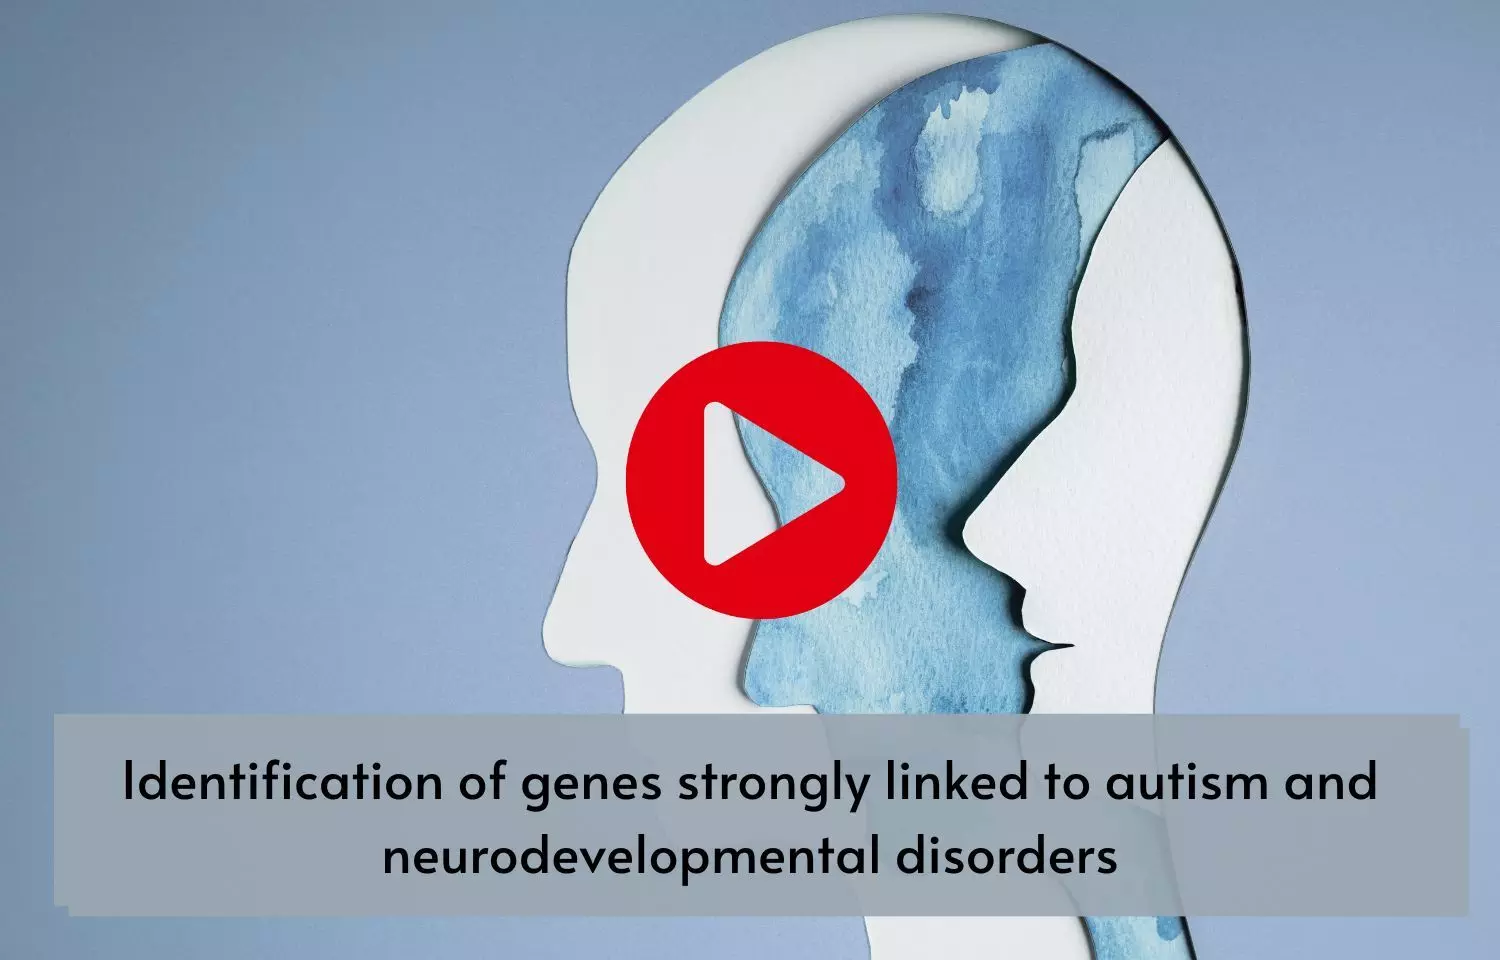 Identification of genes strongly linked to autism and neurodevelopmental disorders